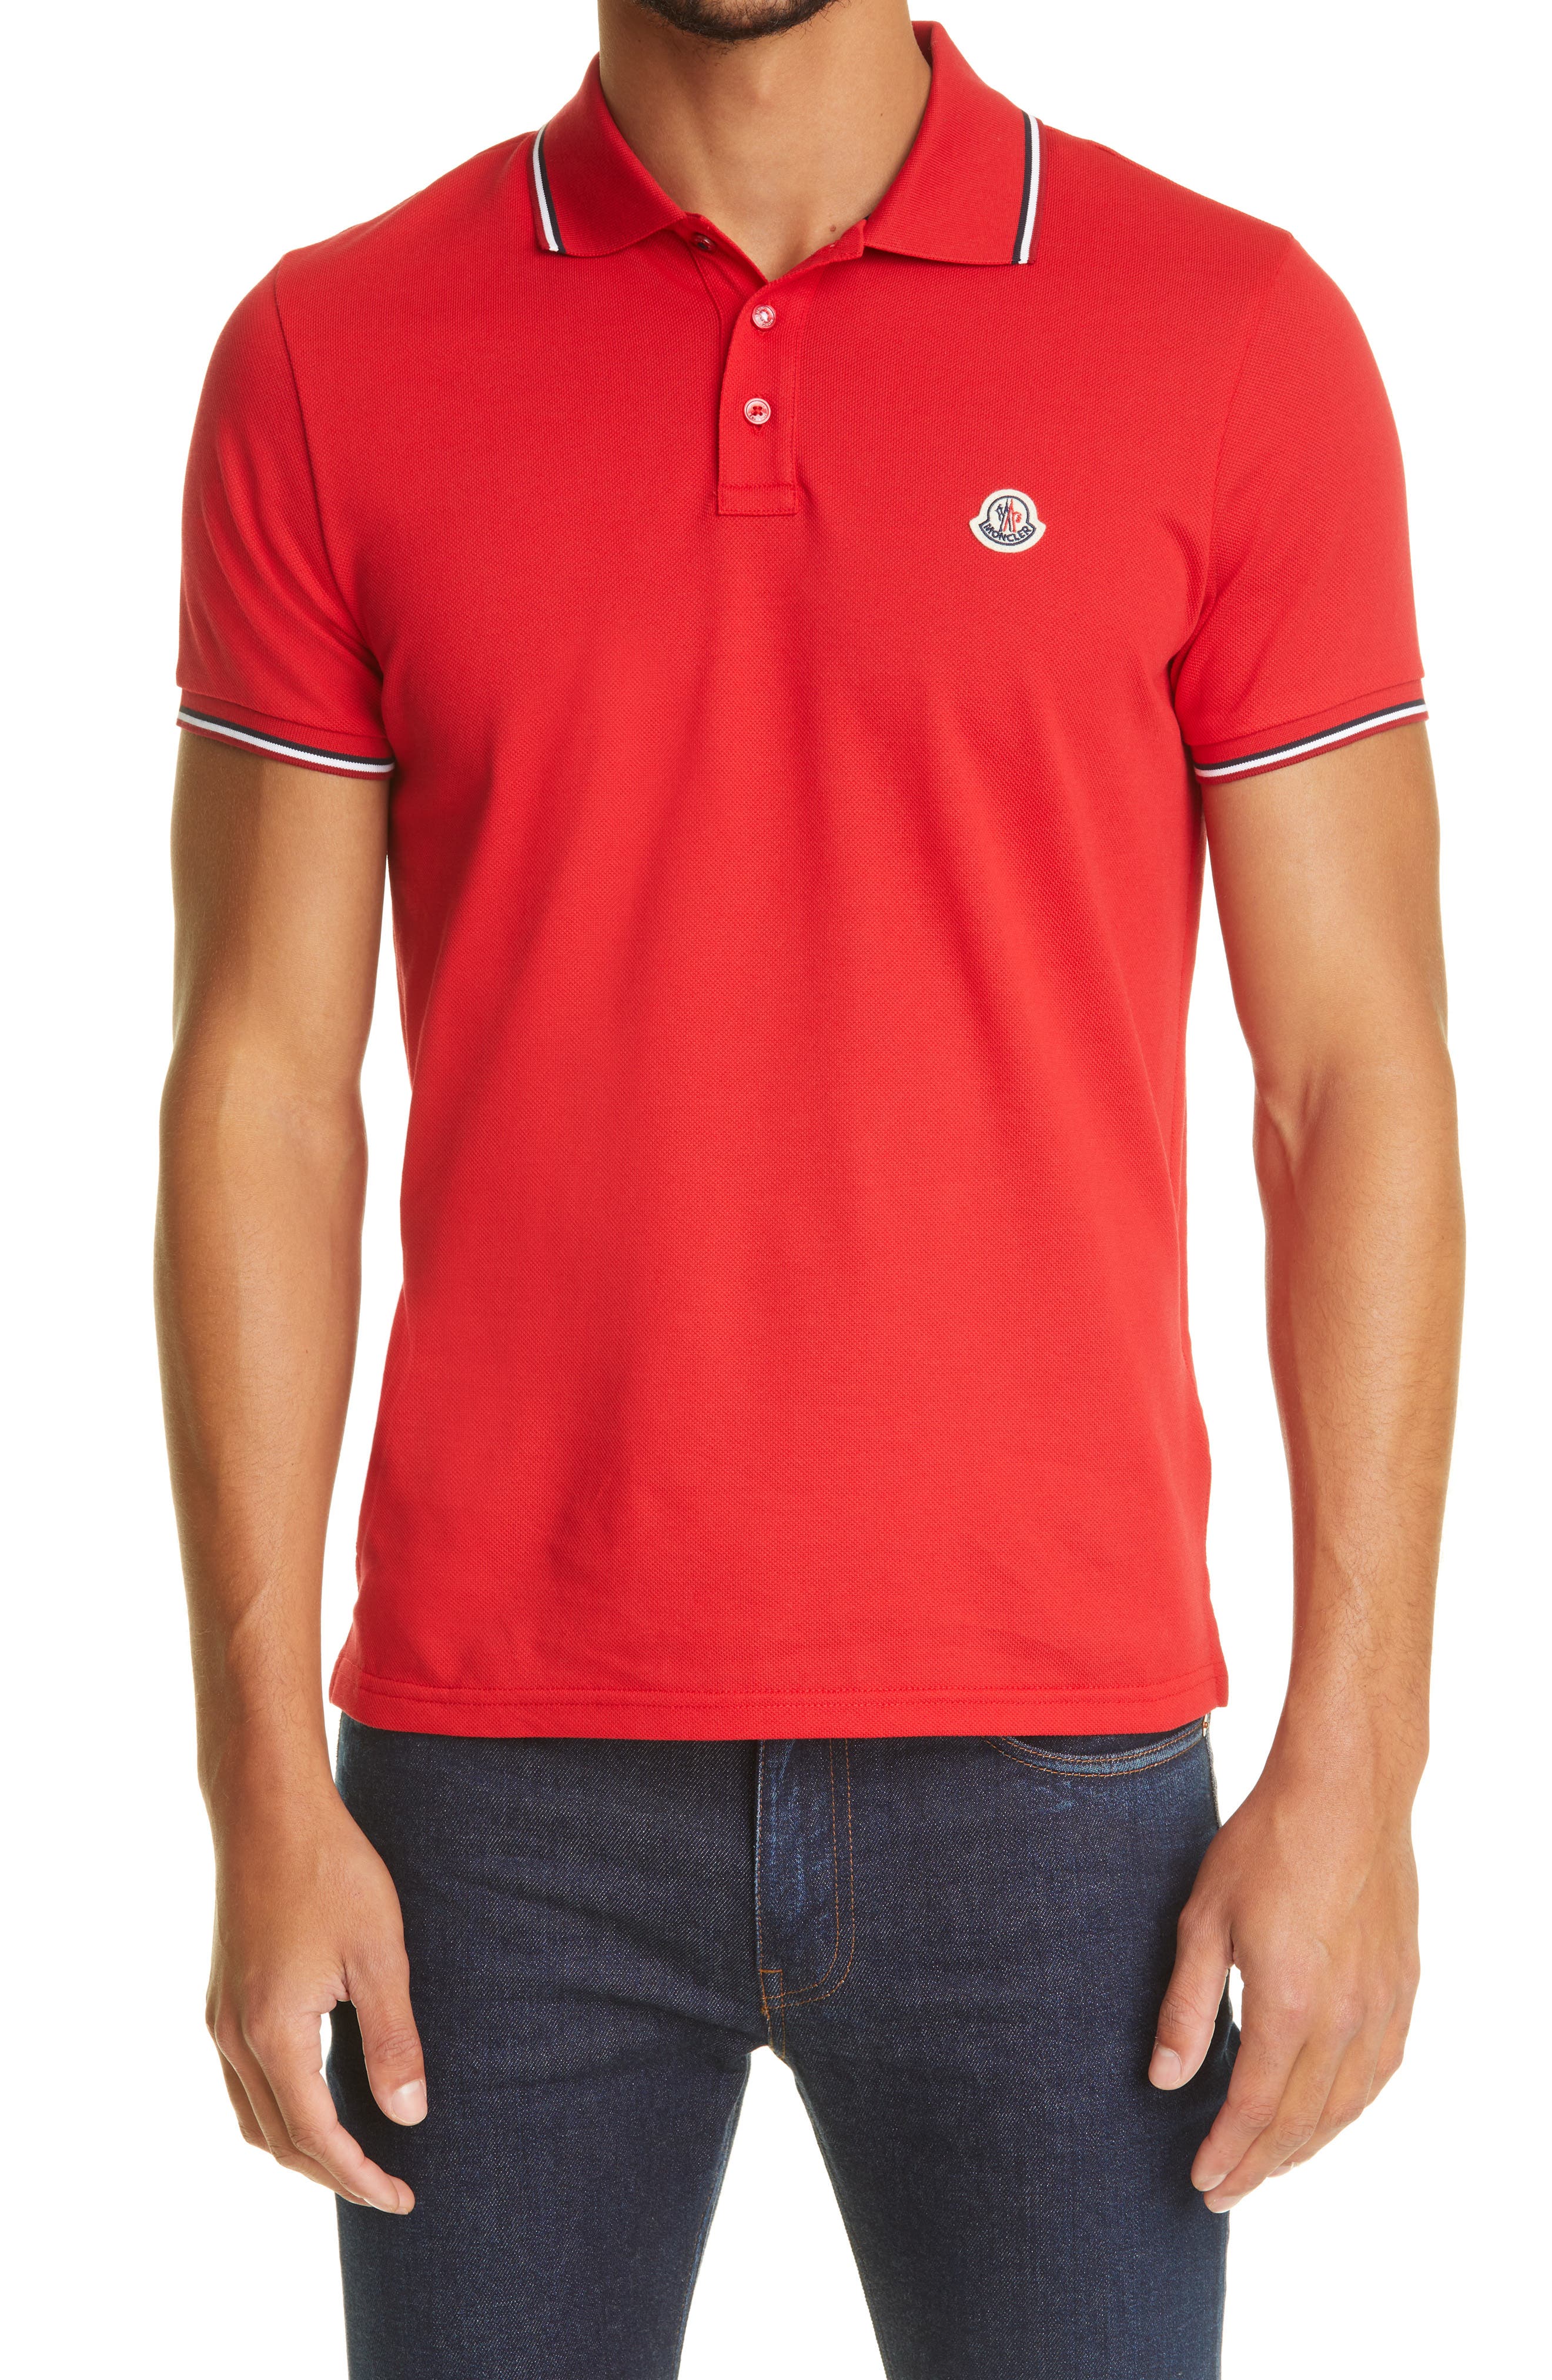 high end polo shirts,Save up to 16%,www.araldicavini.it